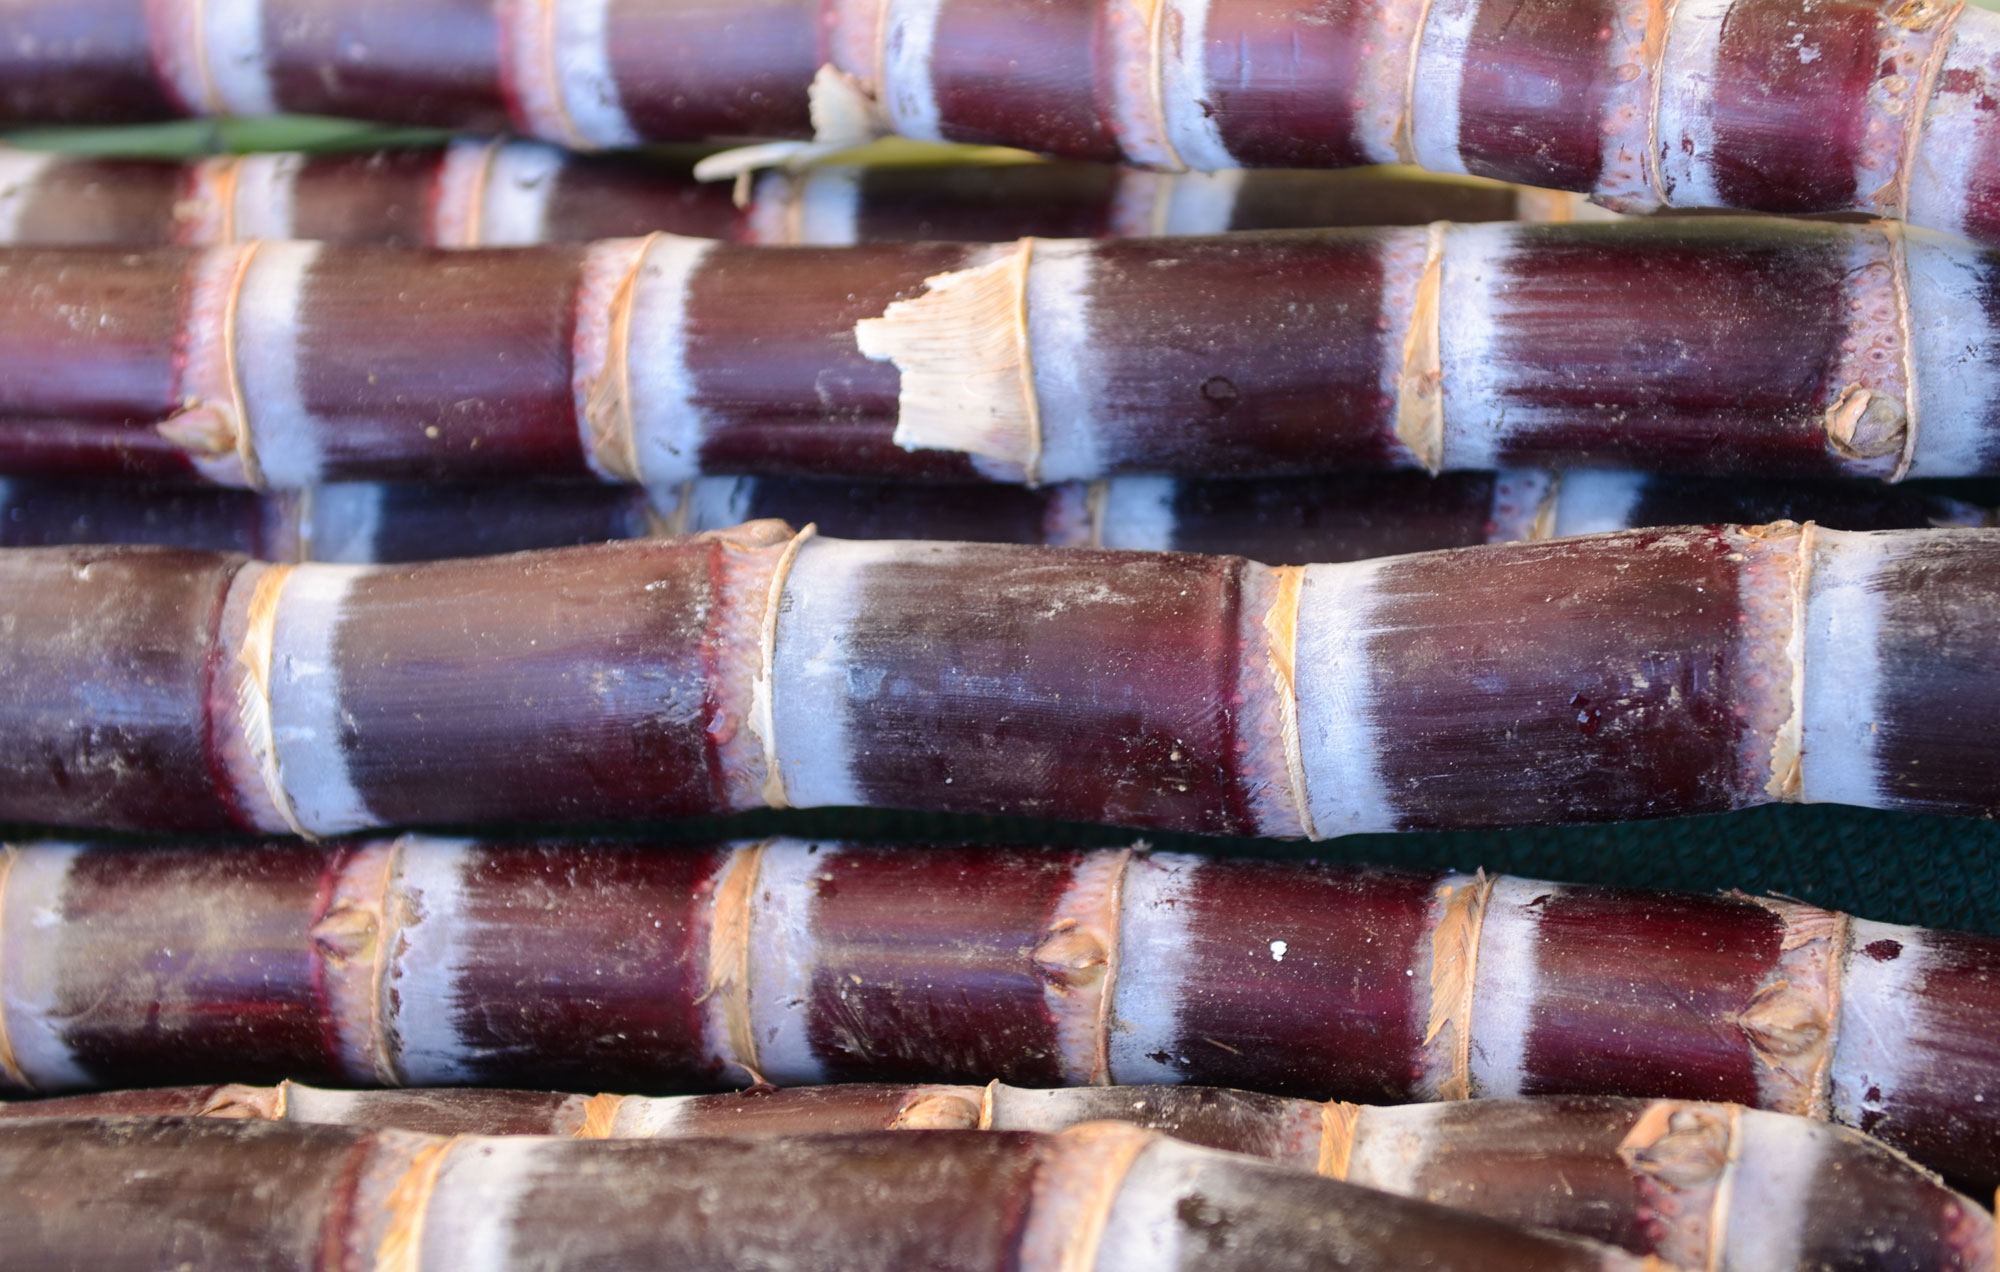 Photograph of sugar cane for sale at a farmers market. The photo shows a close-up of sugar cane stalks. The are maroon at the internodes and nearly white near the nodes.